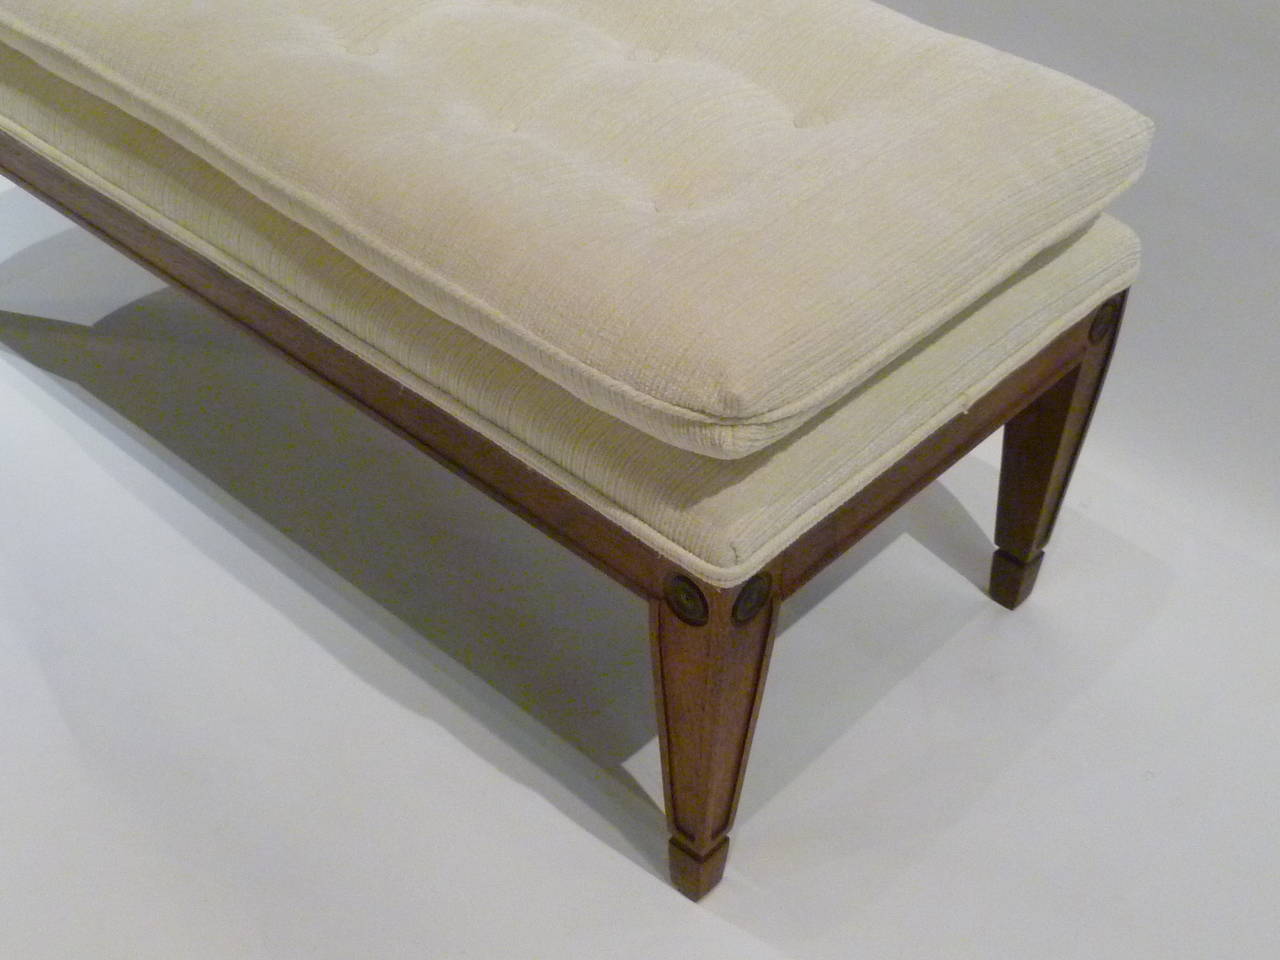 North American Modern Neoclassical Style Tufted Bench